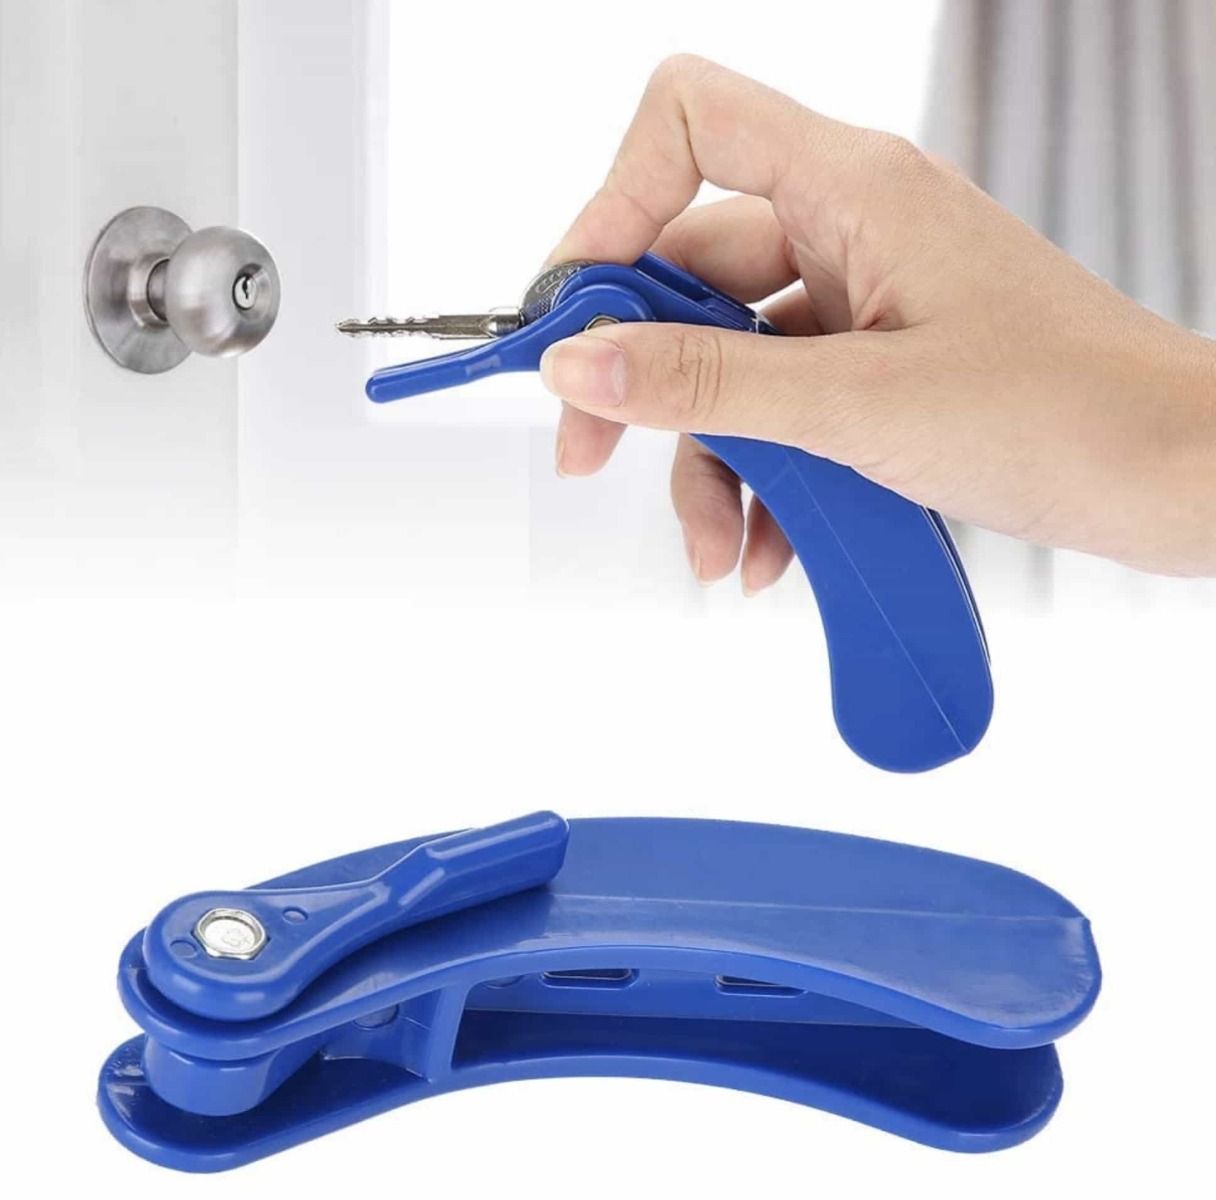 Aidapt Handy Pill Bottle Opener with Label Reading Magnifier Ideal for  Users with Arthritis and Those with a Weakened Grip or Limited Dexterity